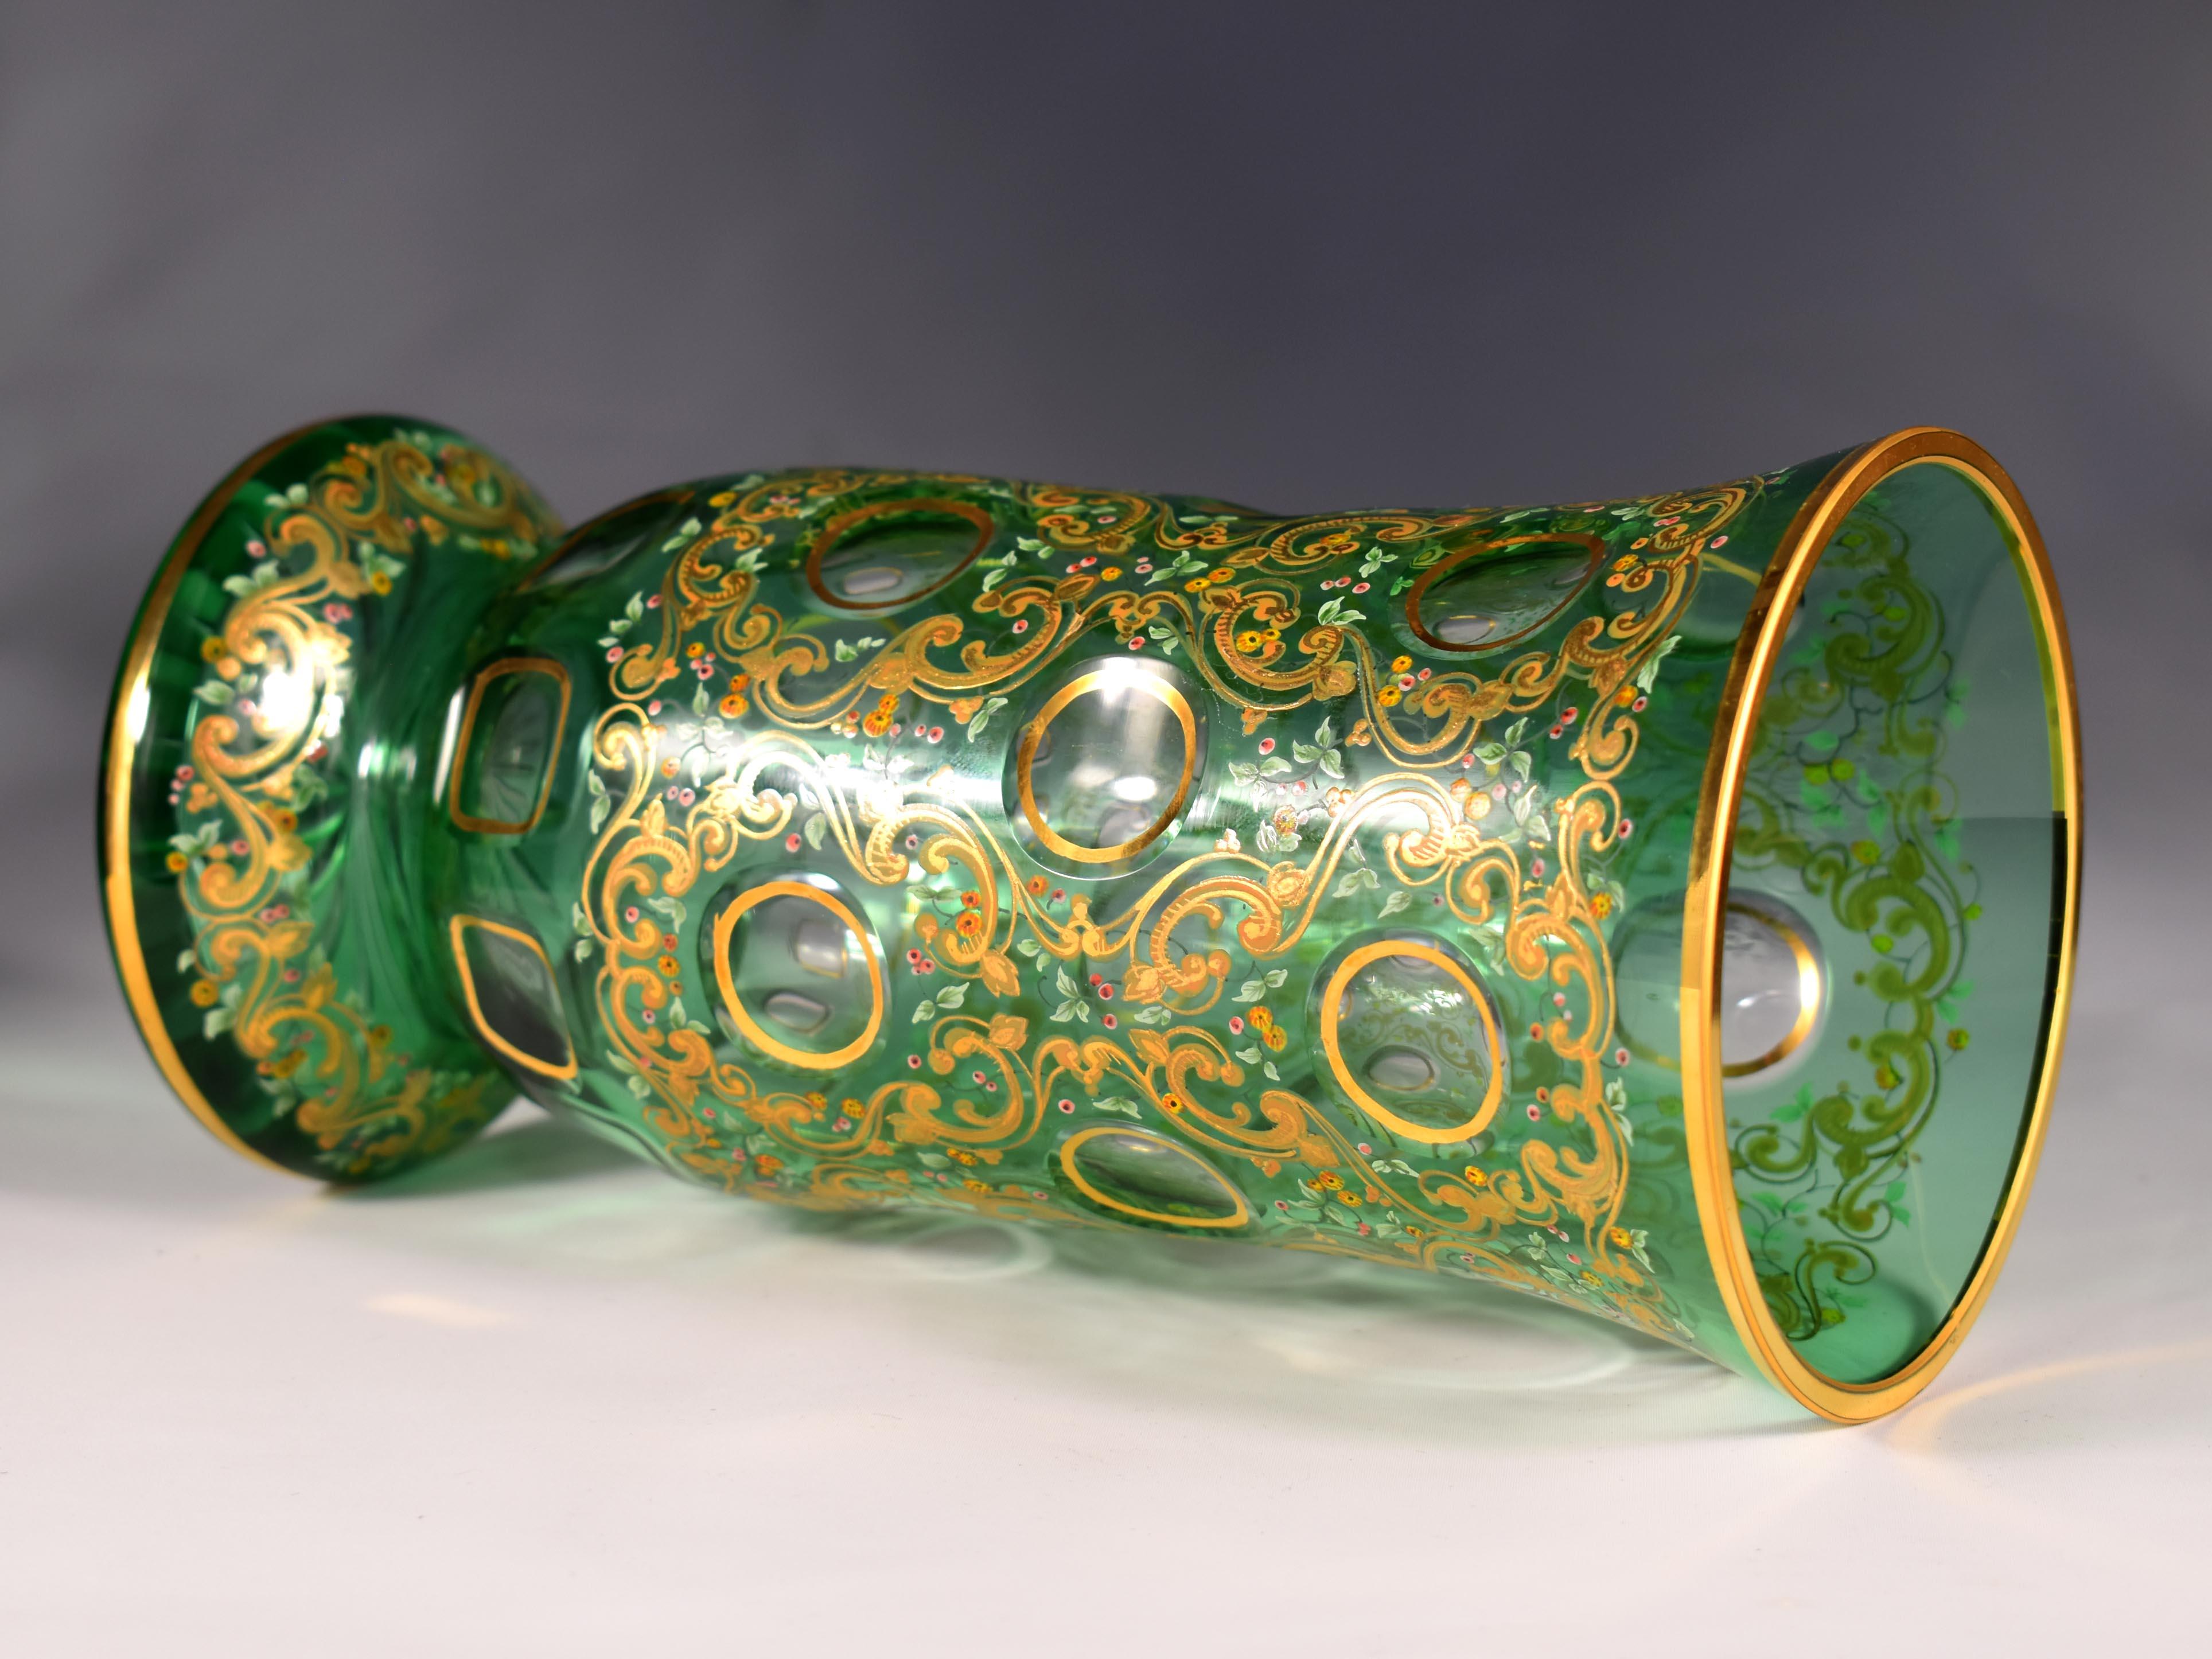 Painted Vase - Overlay Green Glass - 20th Century Bohemian Glass For Sale 3